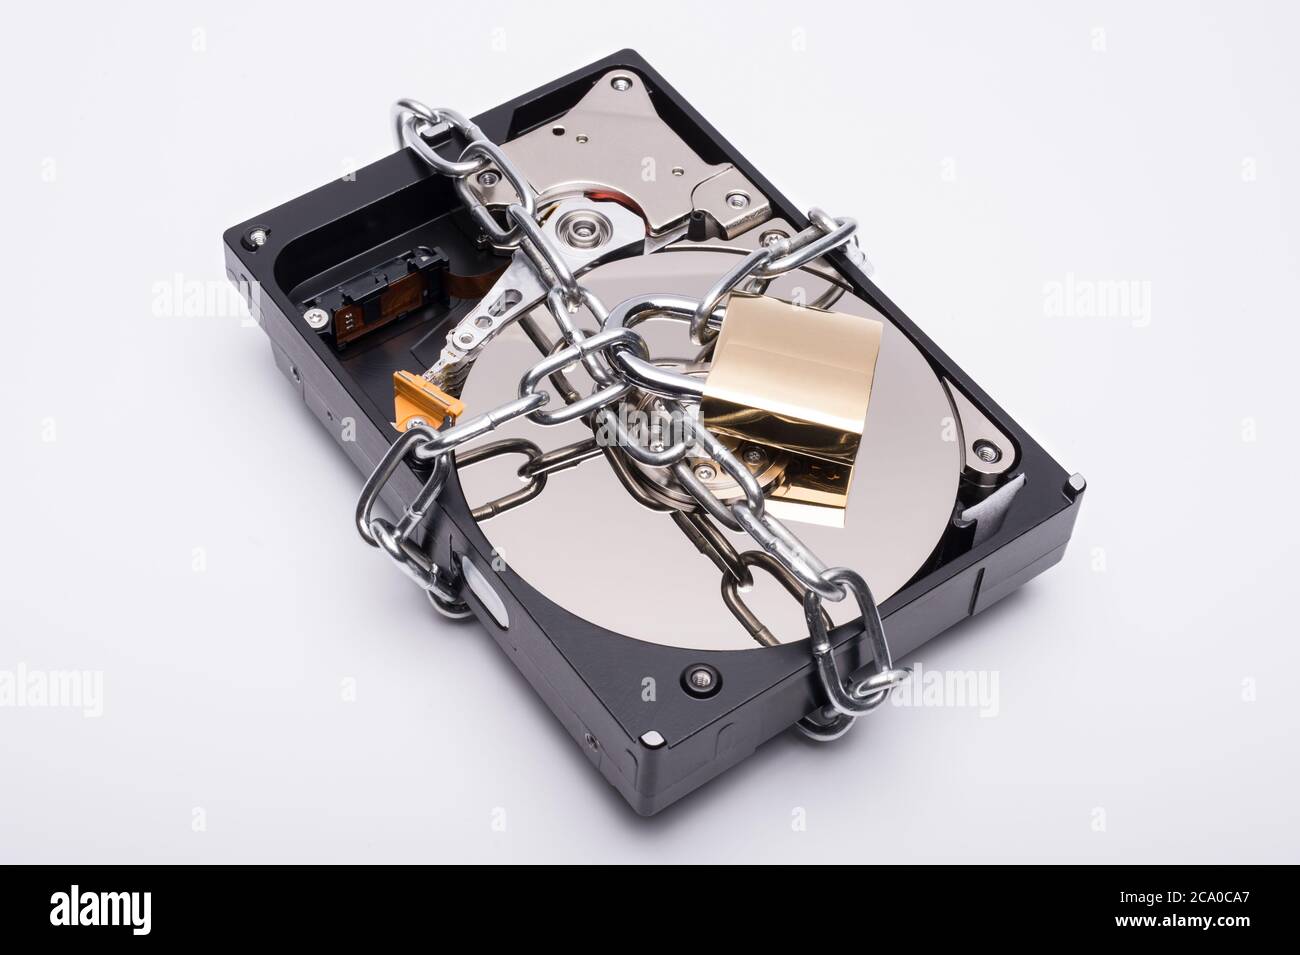 A 3.5' hard disk drive (HDD) secured by a chain and padlock. Stock Photo